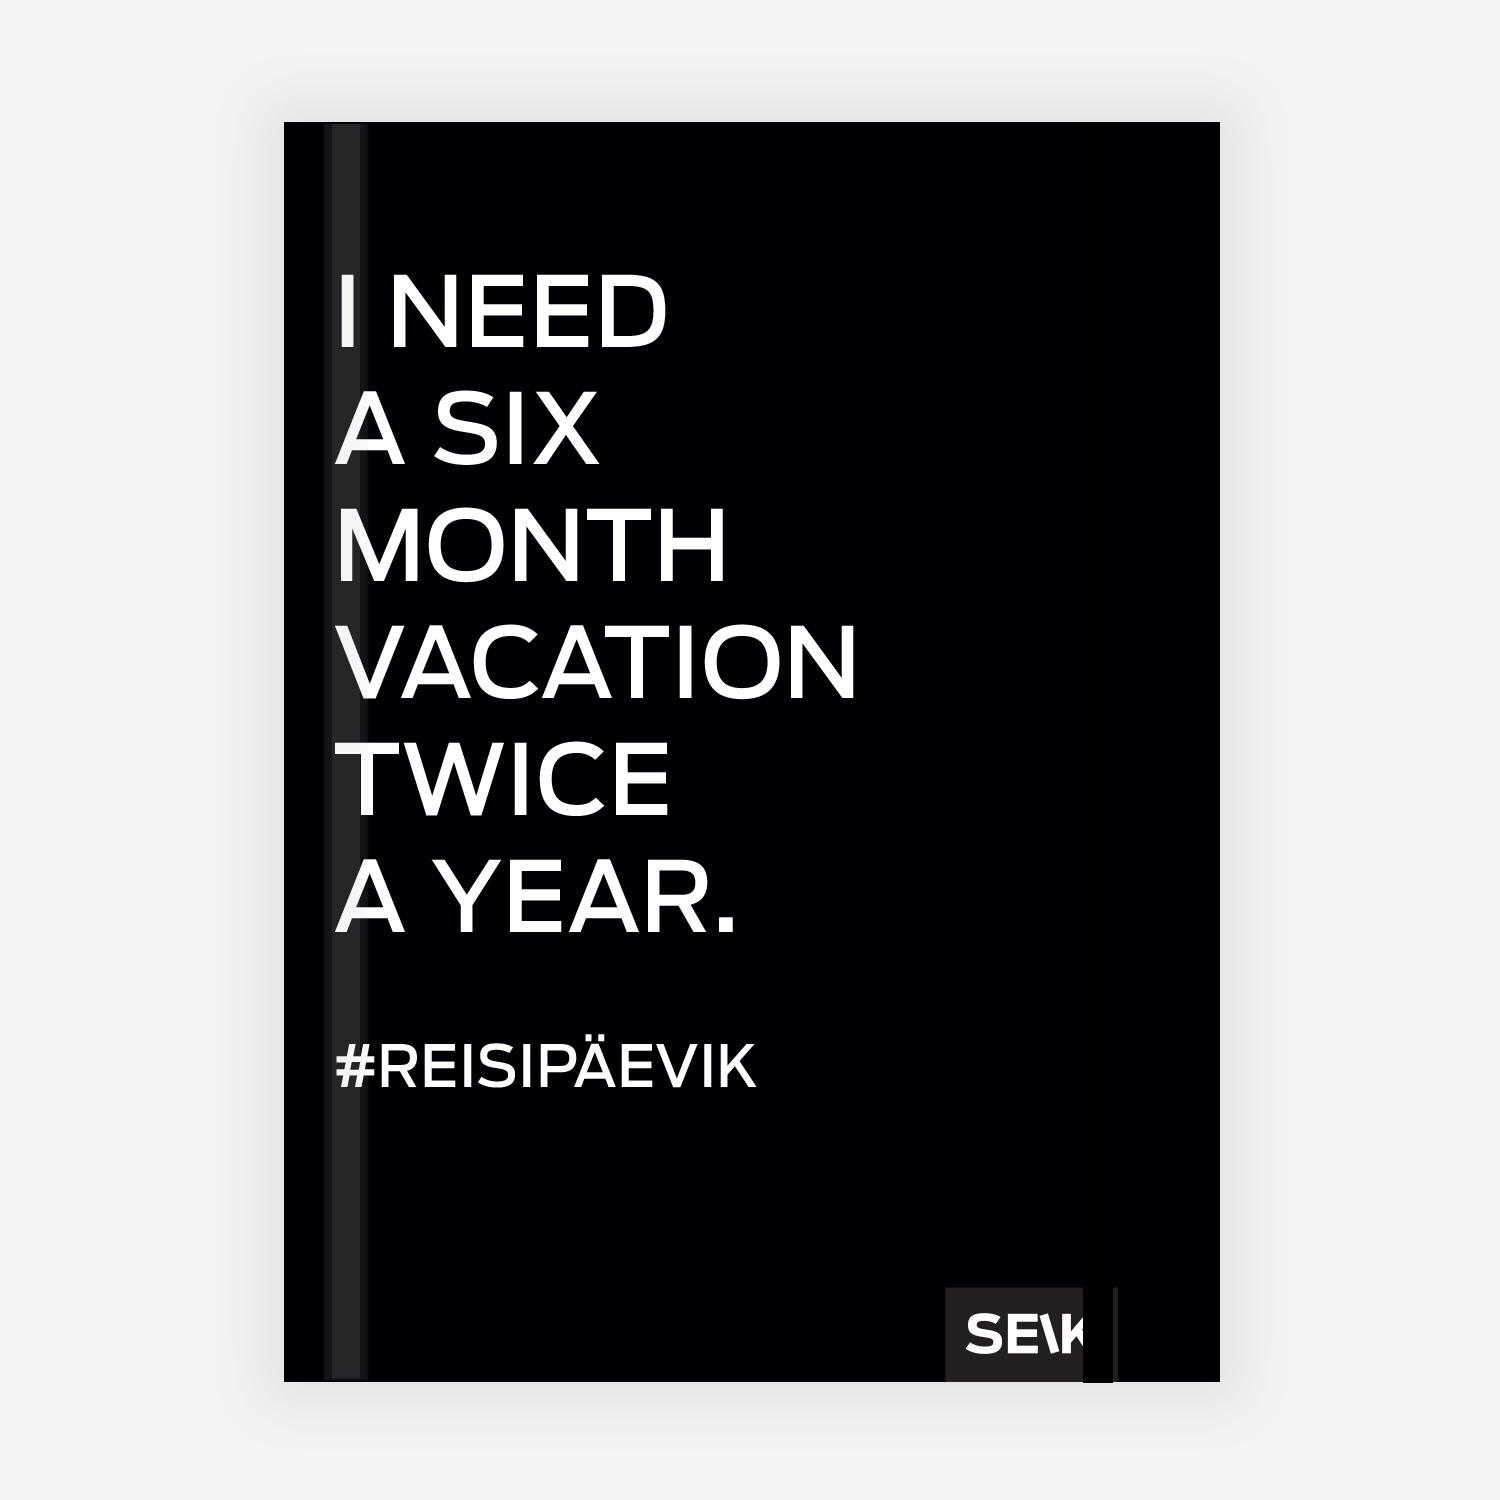 REISIPÄEVIK - I NEED 6-MONTH VACATION 2X A YEAR